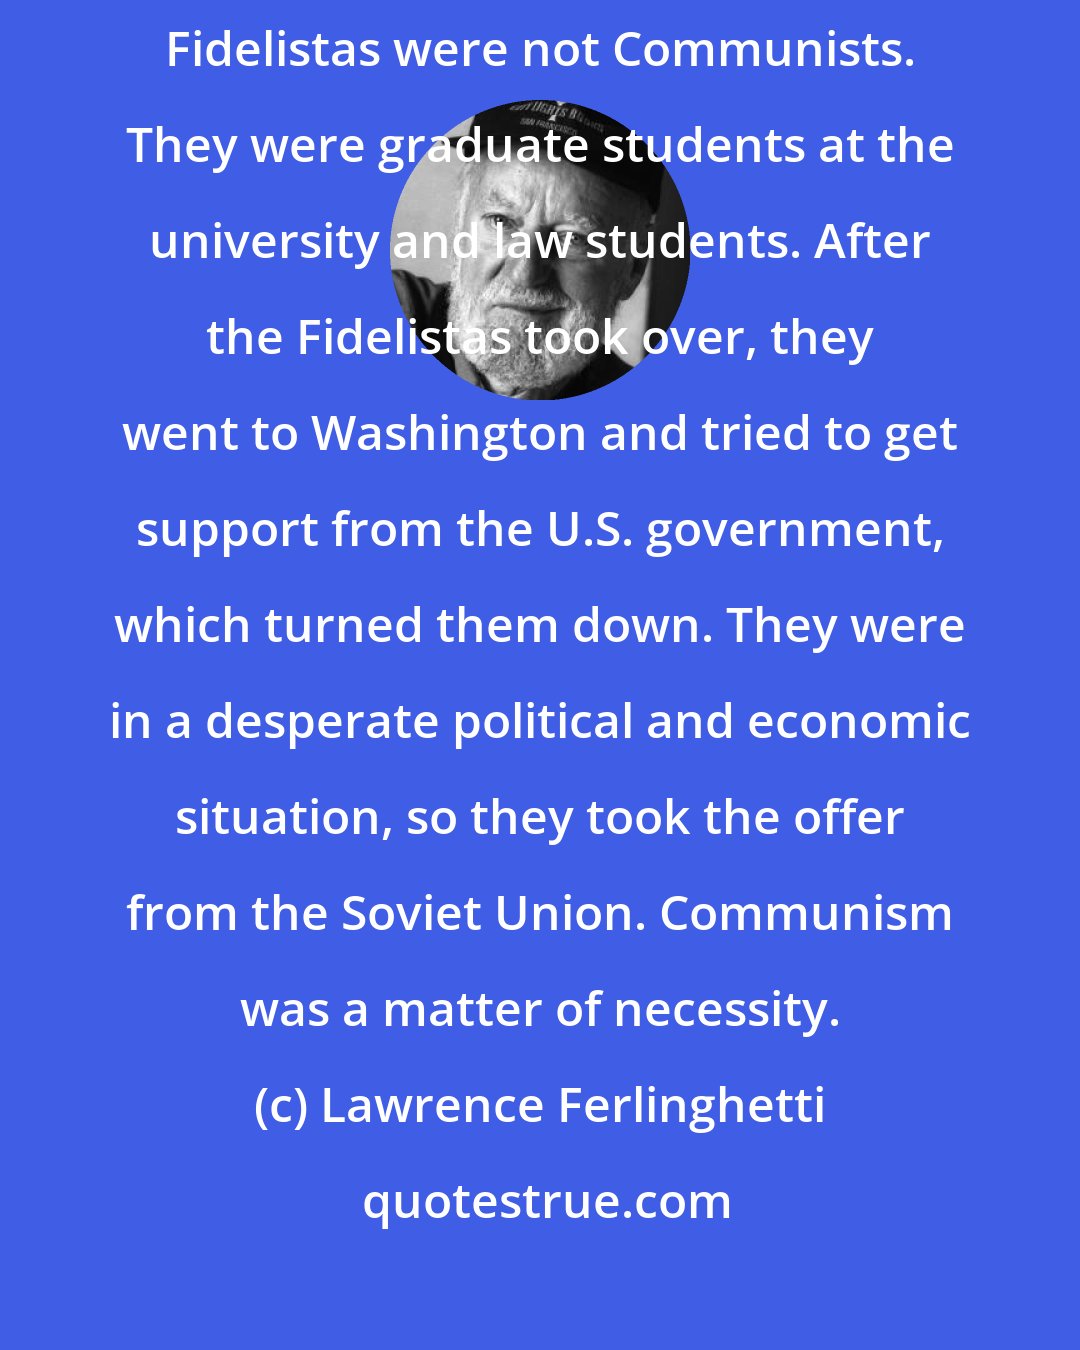 Lawrence Ferlinghetti: Communism wasn't a word that I thought of when I went to Cuba. The original Fidelistas were not Communists. They were graduate students at the university and law students. After the Fidelistas took over, they went to Washington and tried to get support from the U.S. government, which turned them down. They were in a desperate political and economic situation, so they took the offer from the Soviet Union. Communism was a matter of necessity.